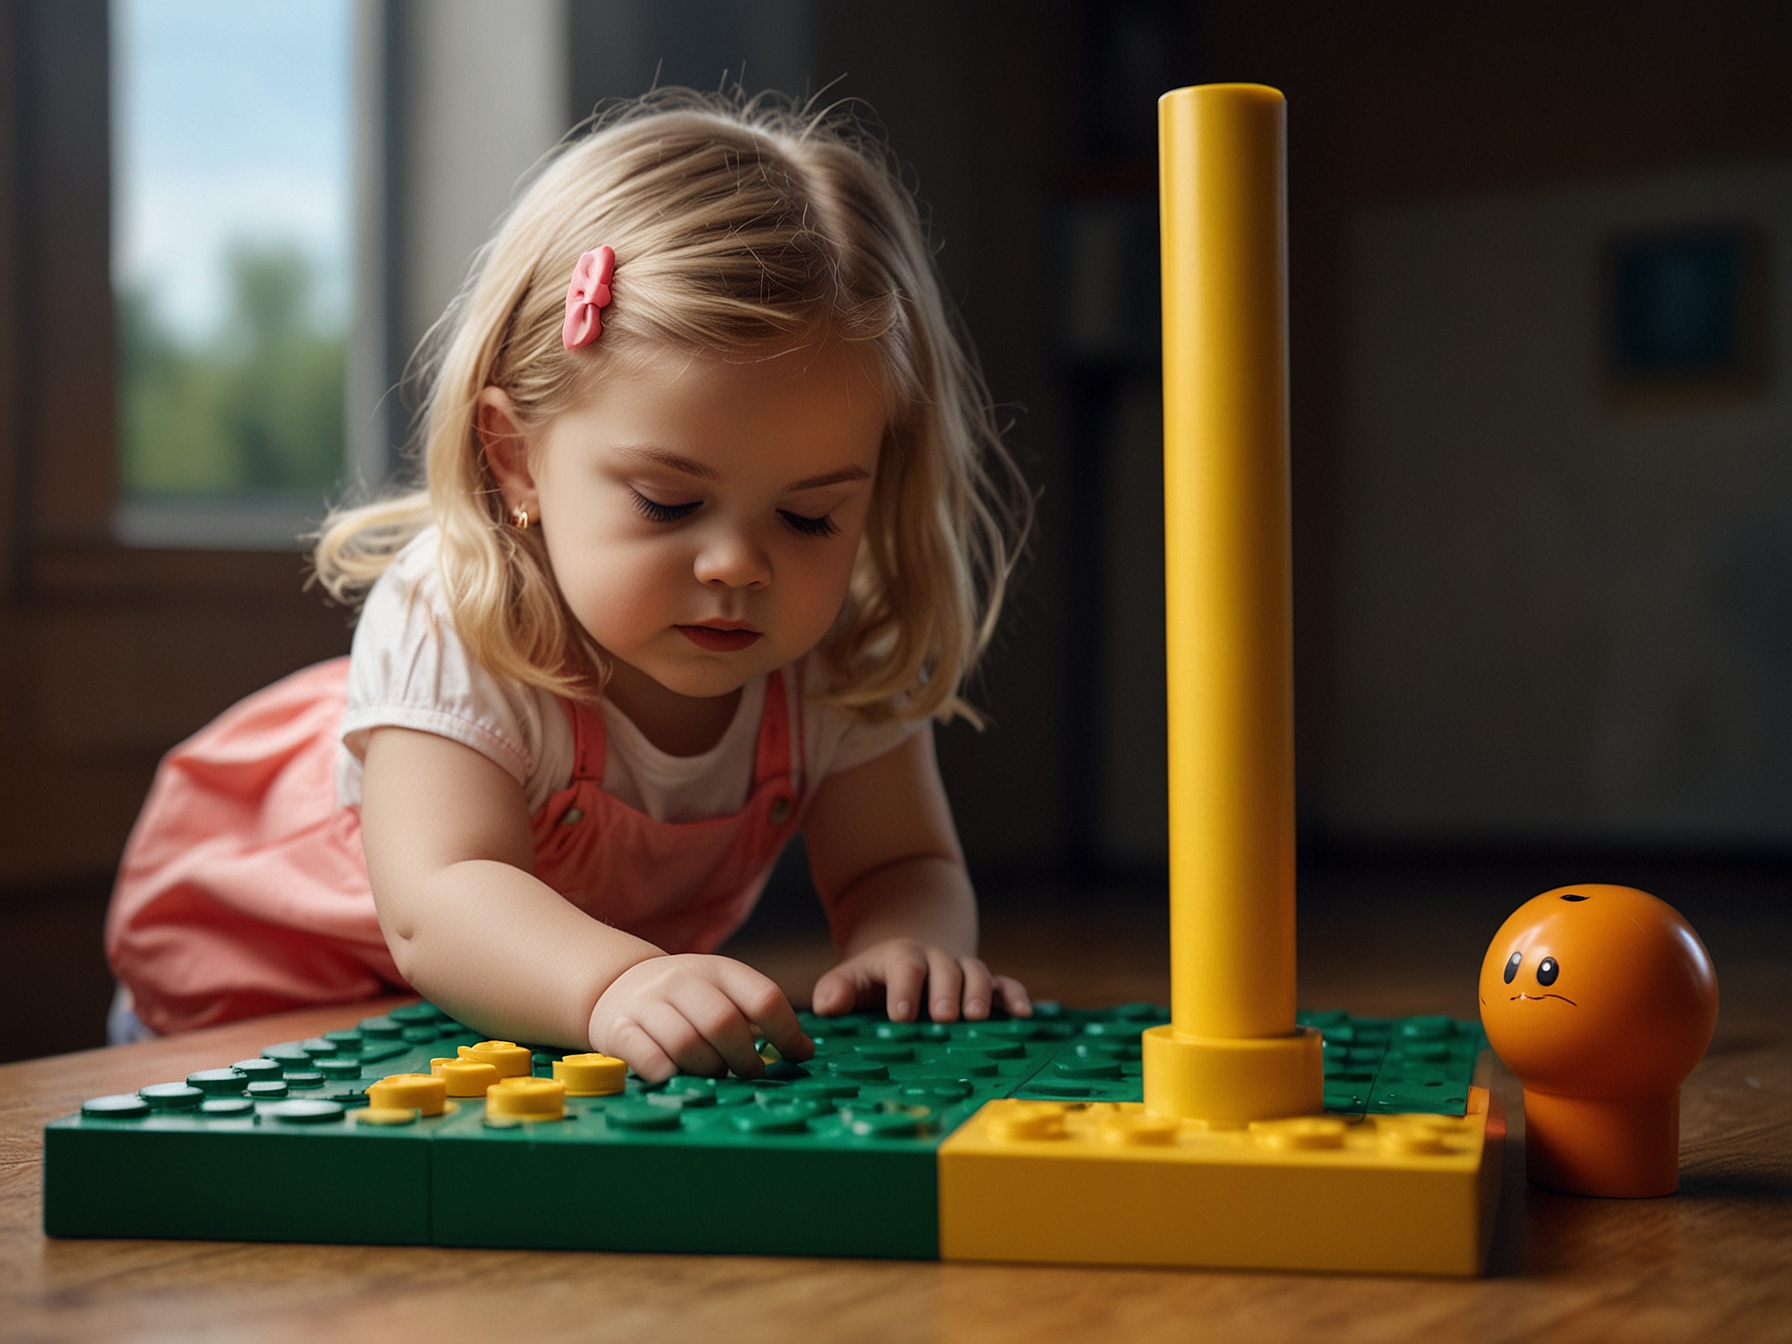 Image of the Lego Princess Peach Starter Course displaying the interactive Peach figure, Start Pipe, Goal Pole, Lemmy, and Yellow Toad. A young child is seen playing with the set, illustrating its engaging features.